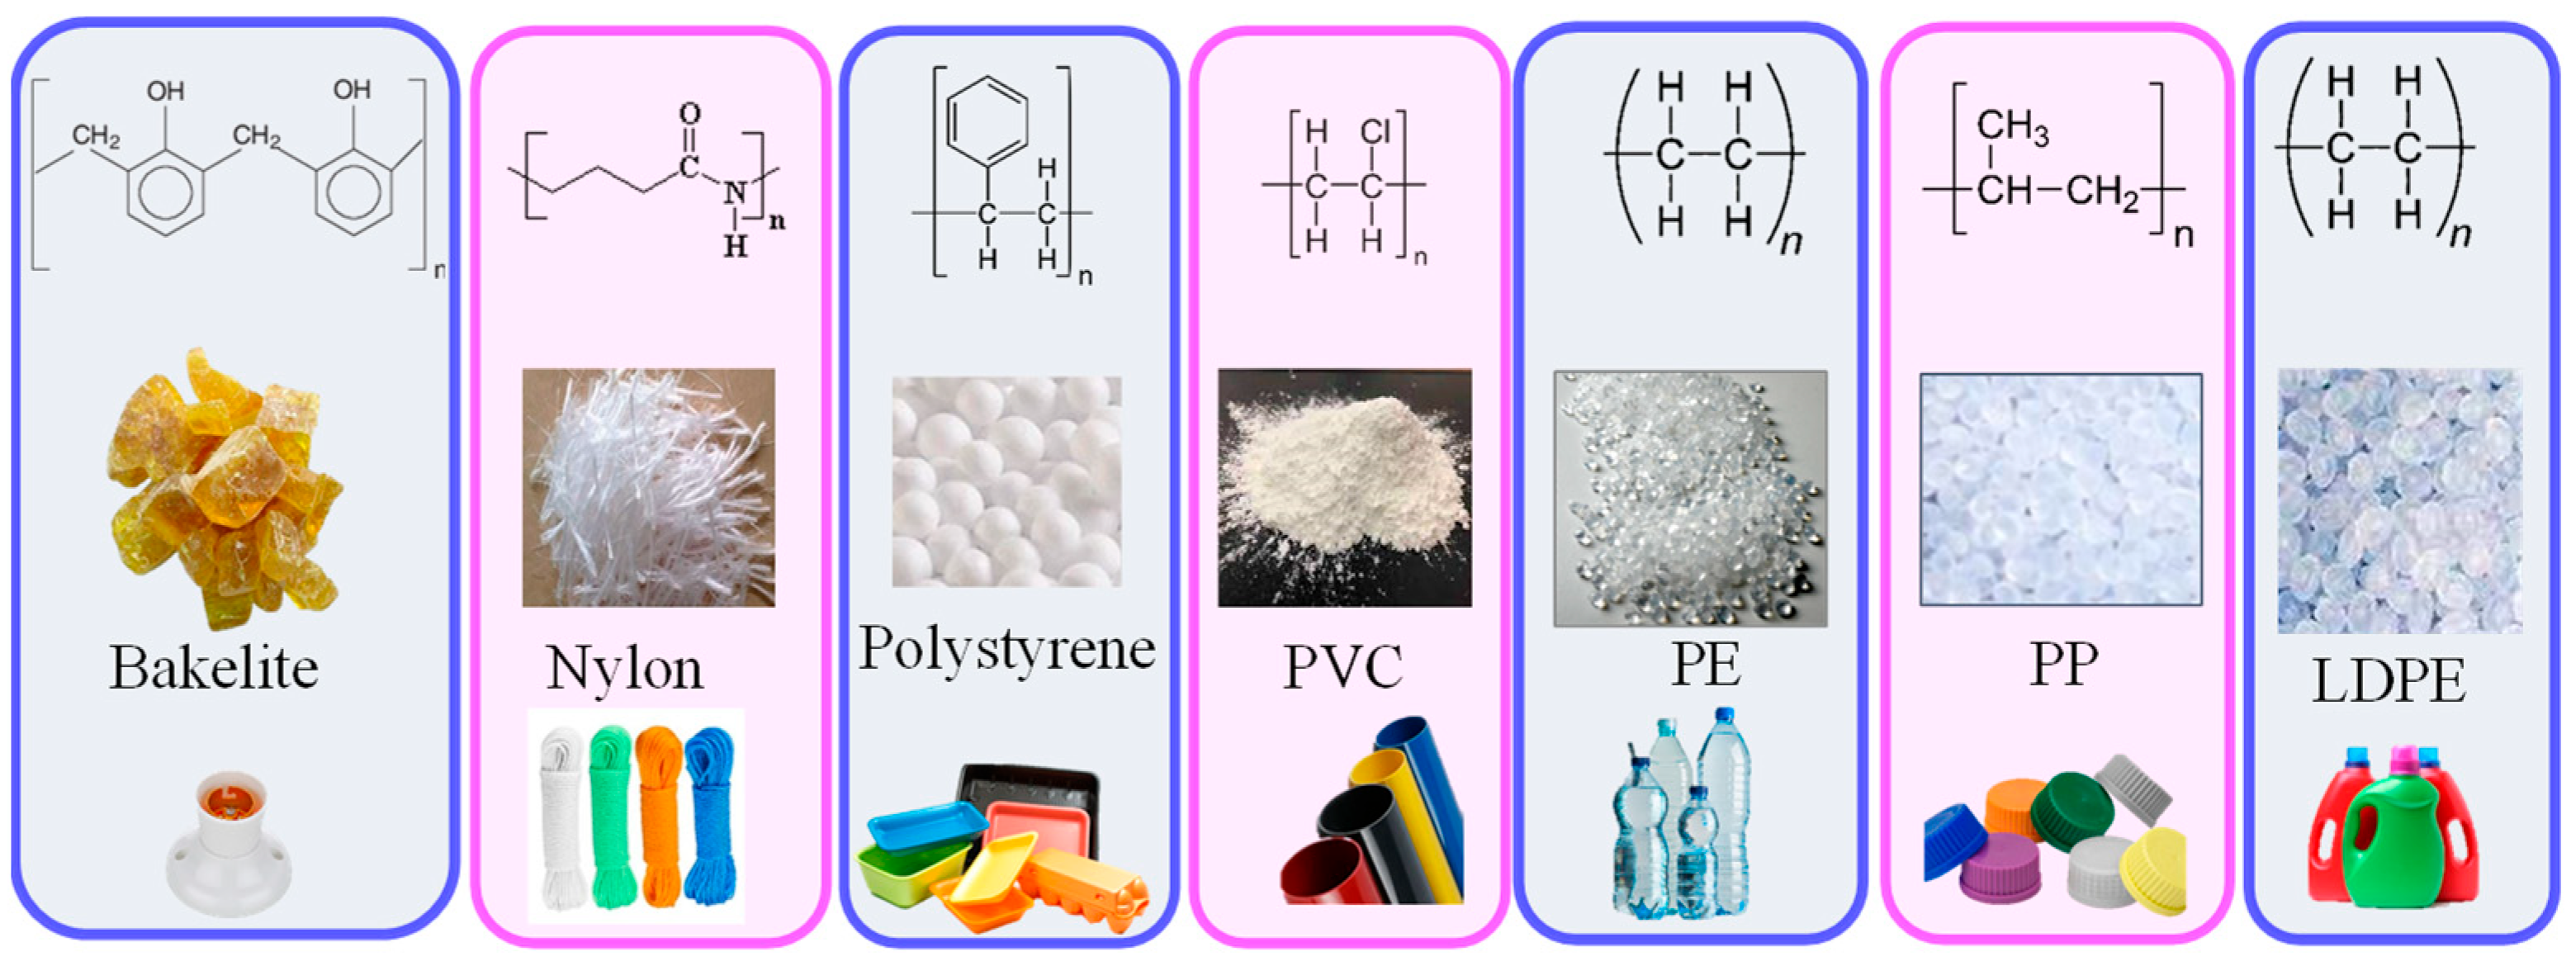 Polymers 14 01445 g011